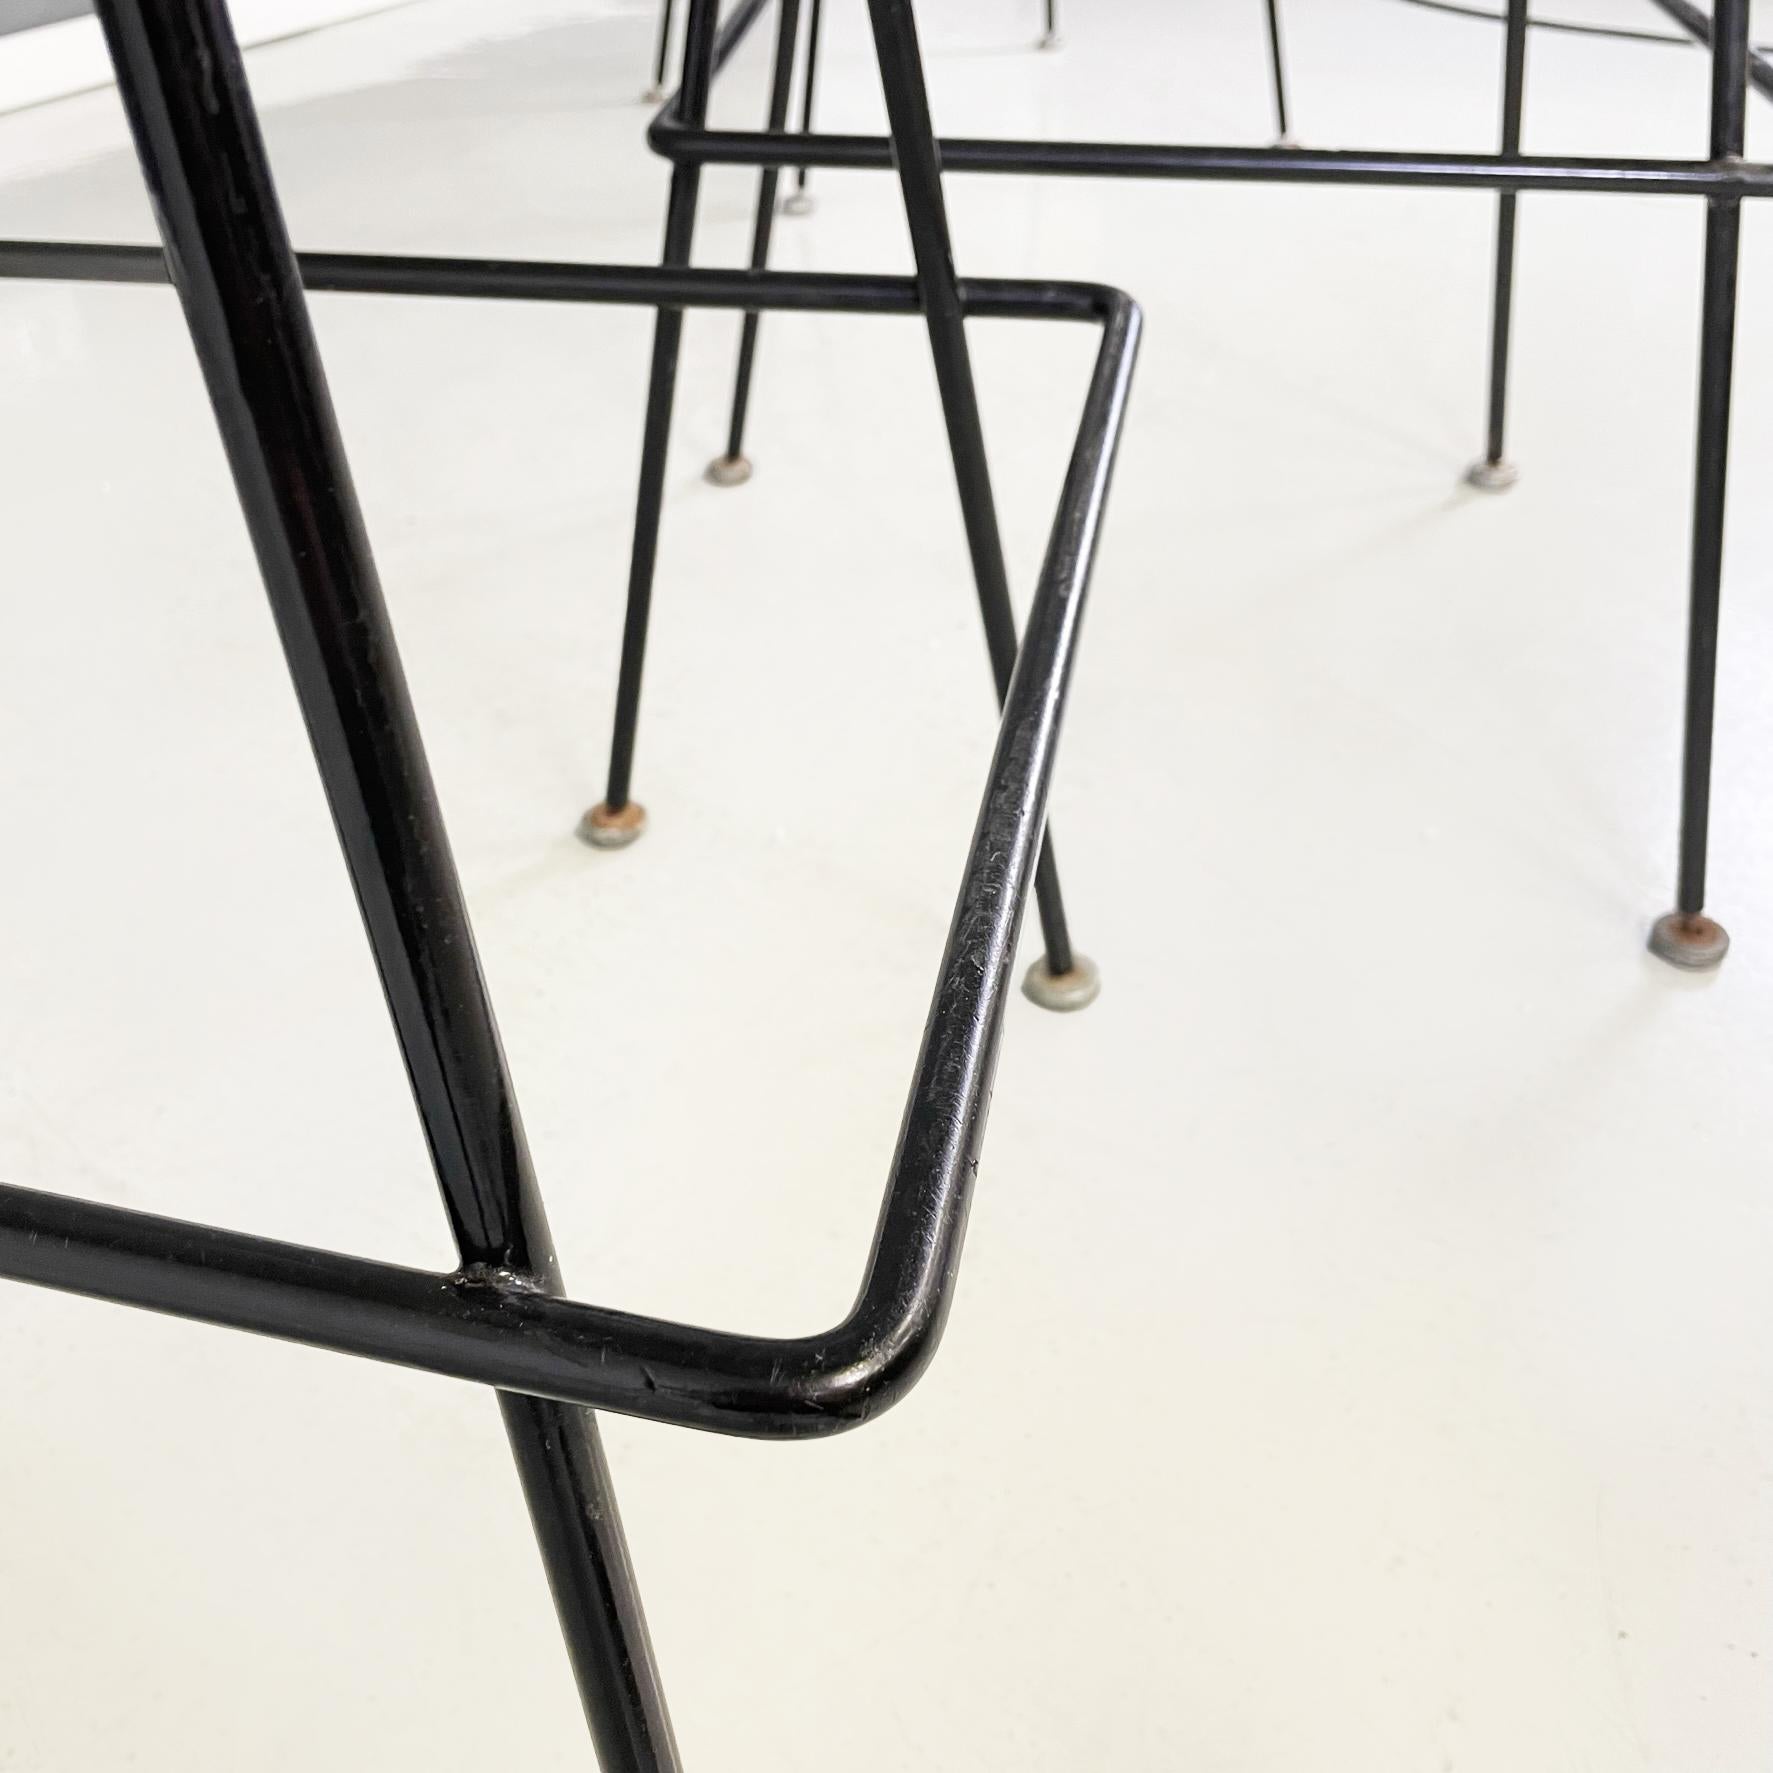 American Midcentury Black White Metal High Stools by Bertoia for Knoll, 1960s For Sale 12